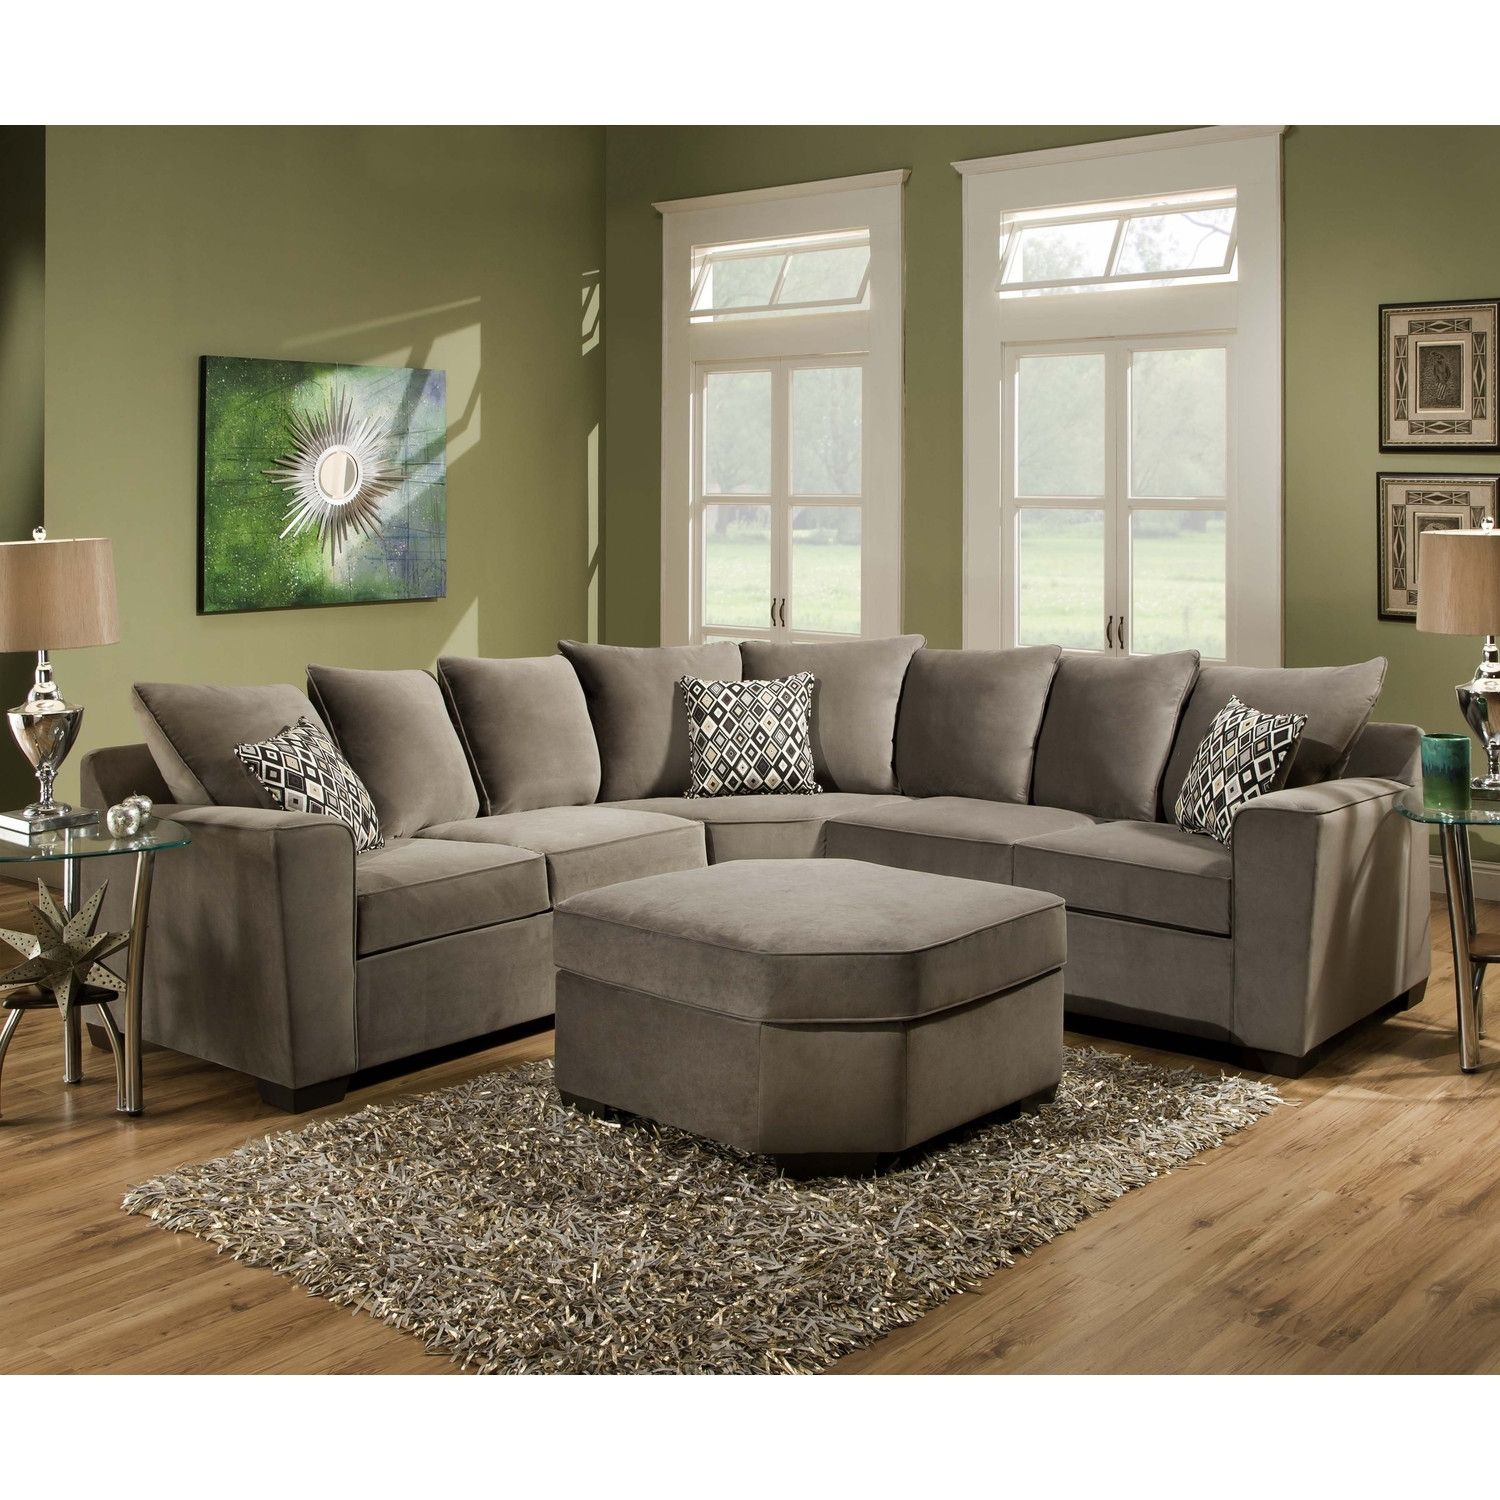 Lovely Plush Sectional Sofas 26 On Loveseat Twin Sleeper Sofa With In Plush Sectional Sofas (View 7 of 10)